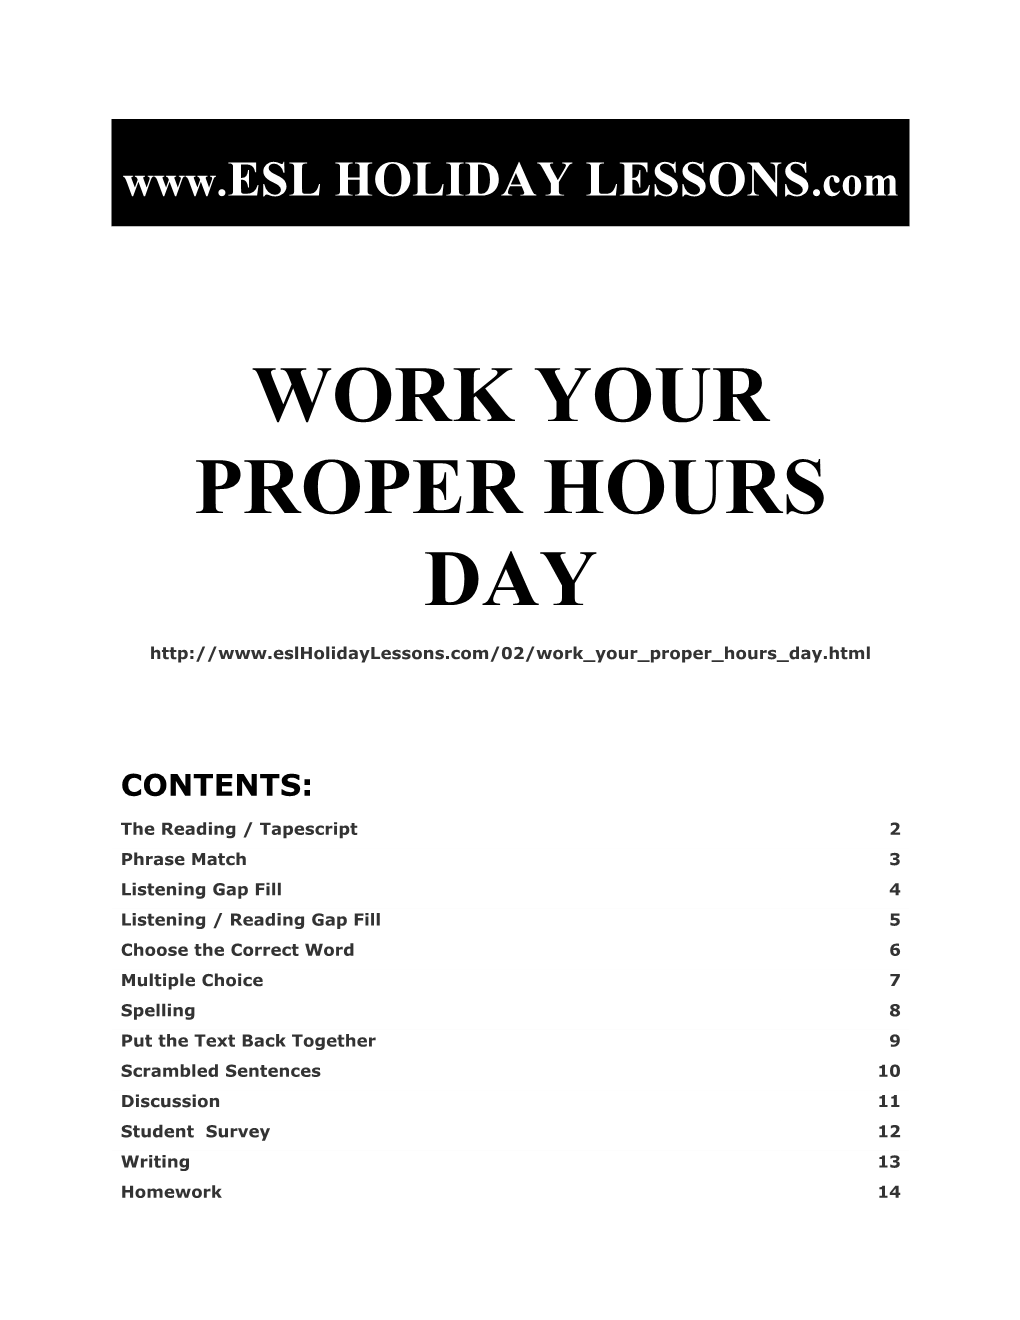 Holiday Lessons - Work Your Proper Hours Day